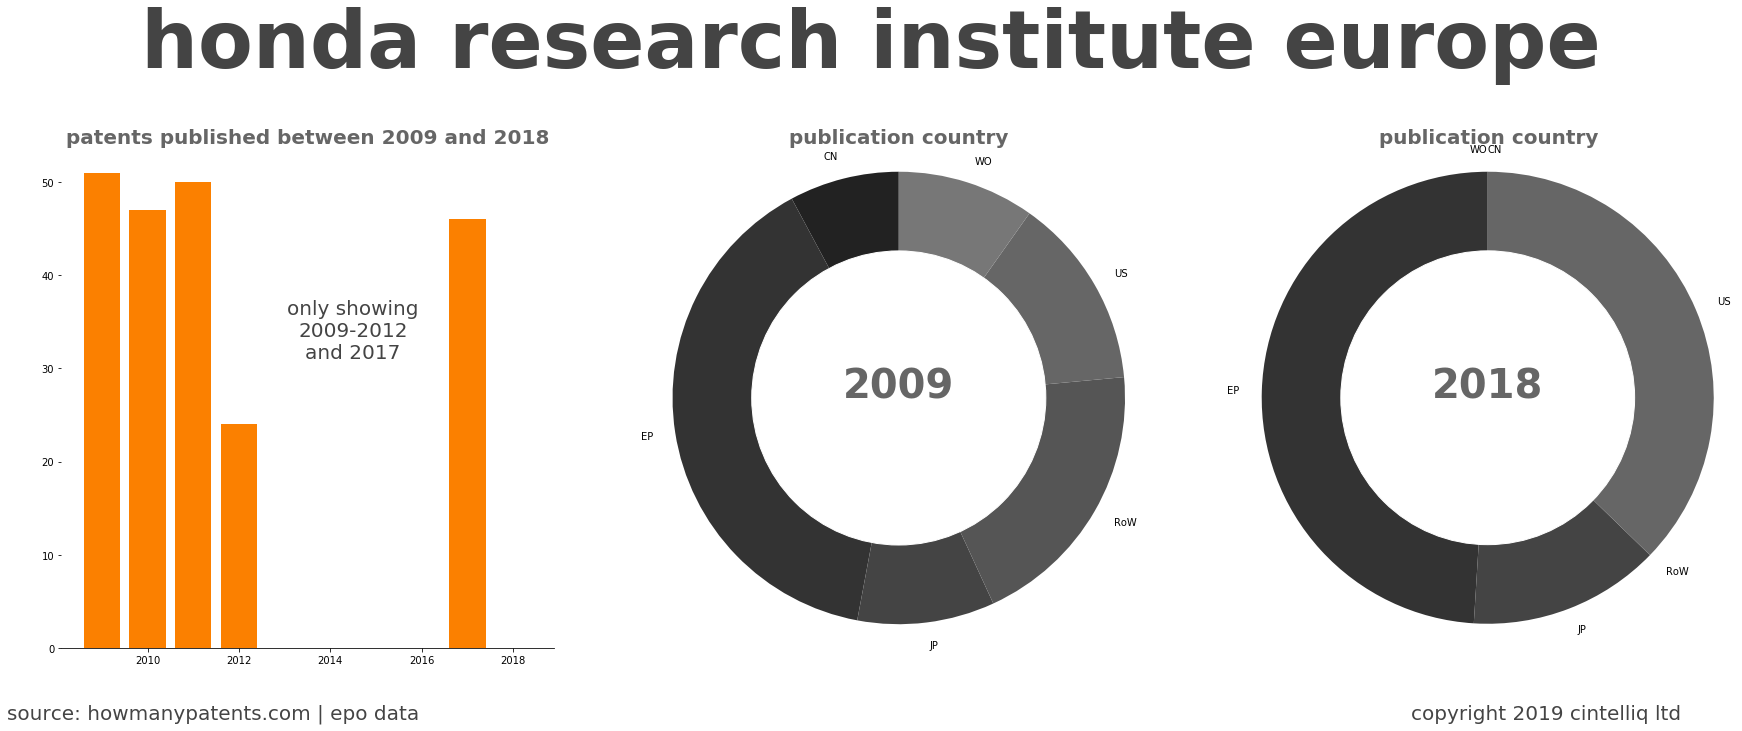 summary of patents for Honda Research Institute Europe